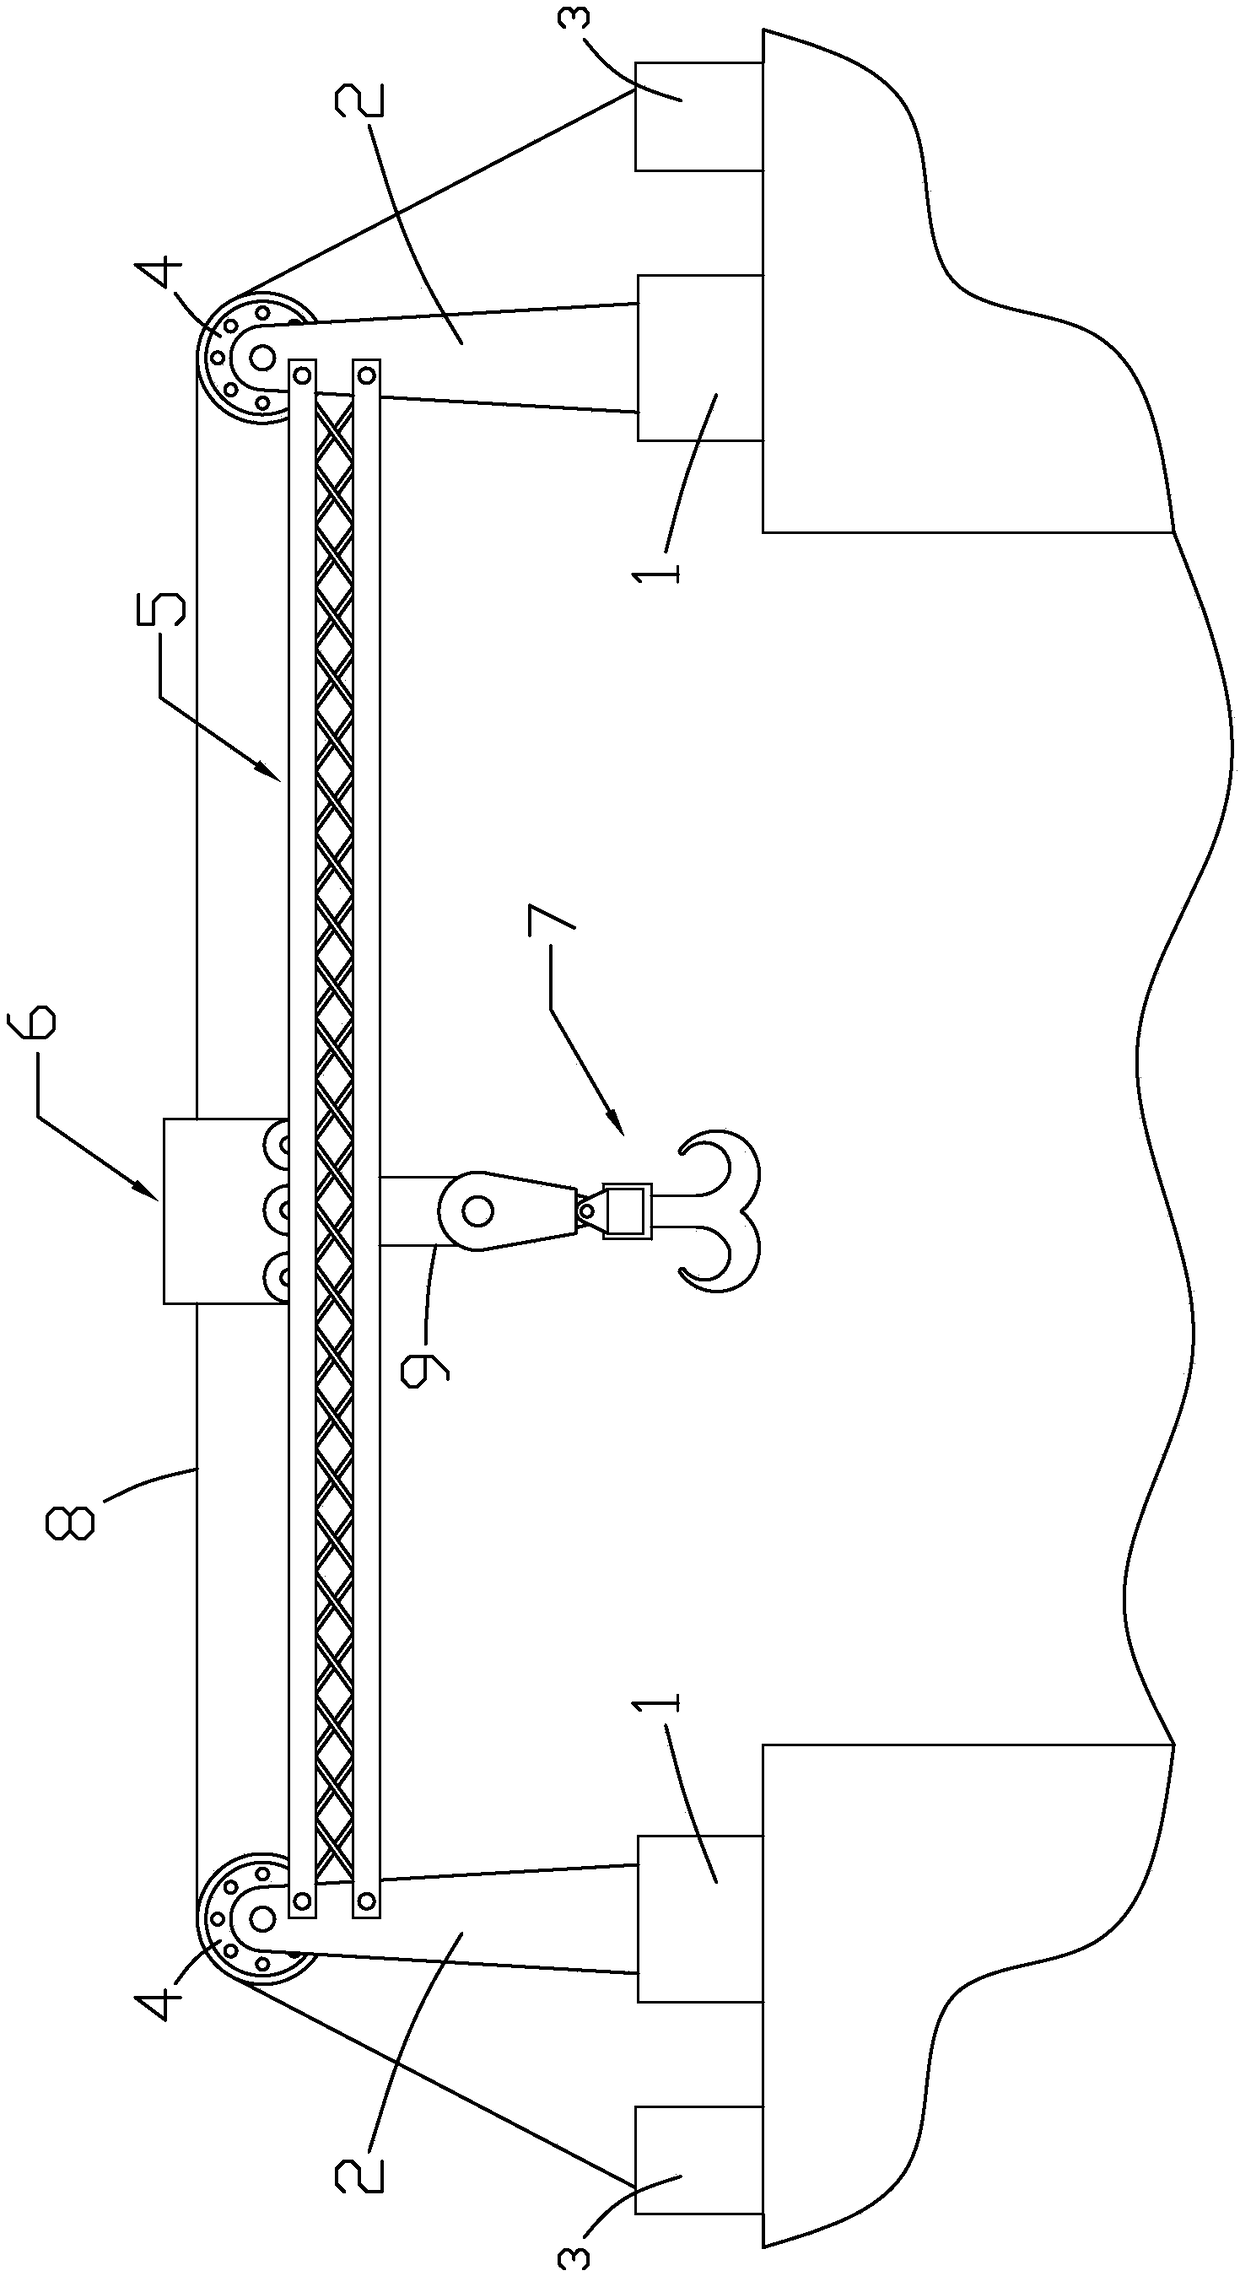 Hoisting device for constructing long-span wooden lounge bridge and method